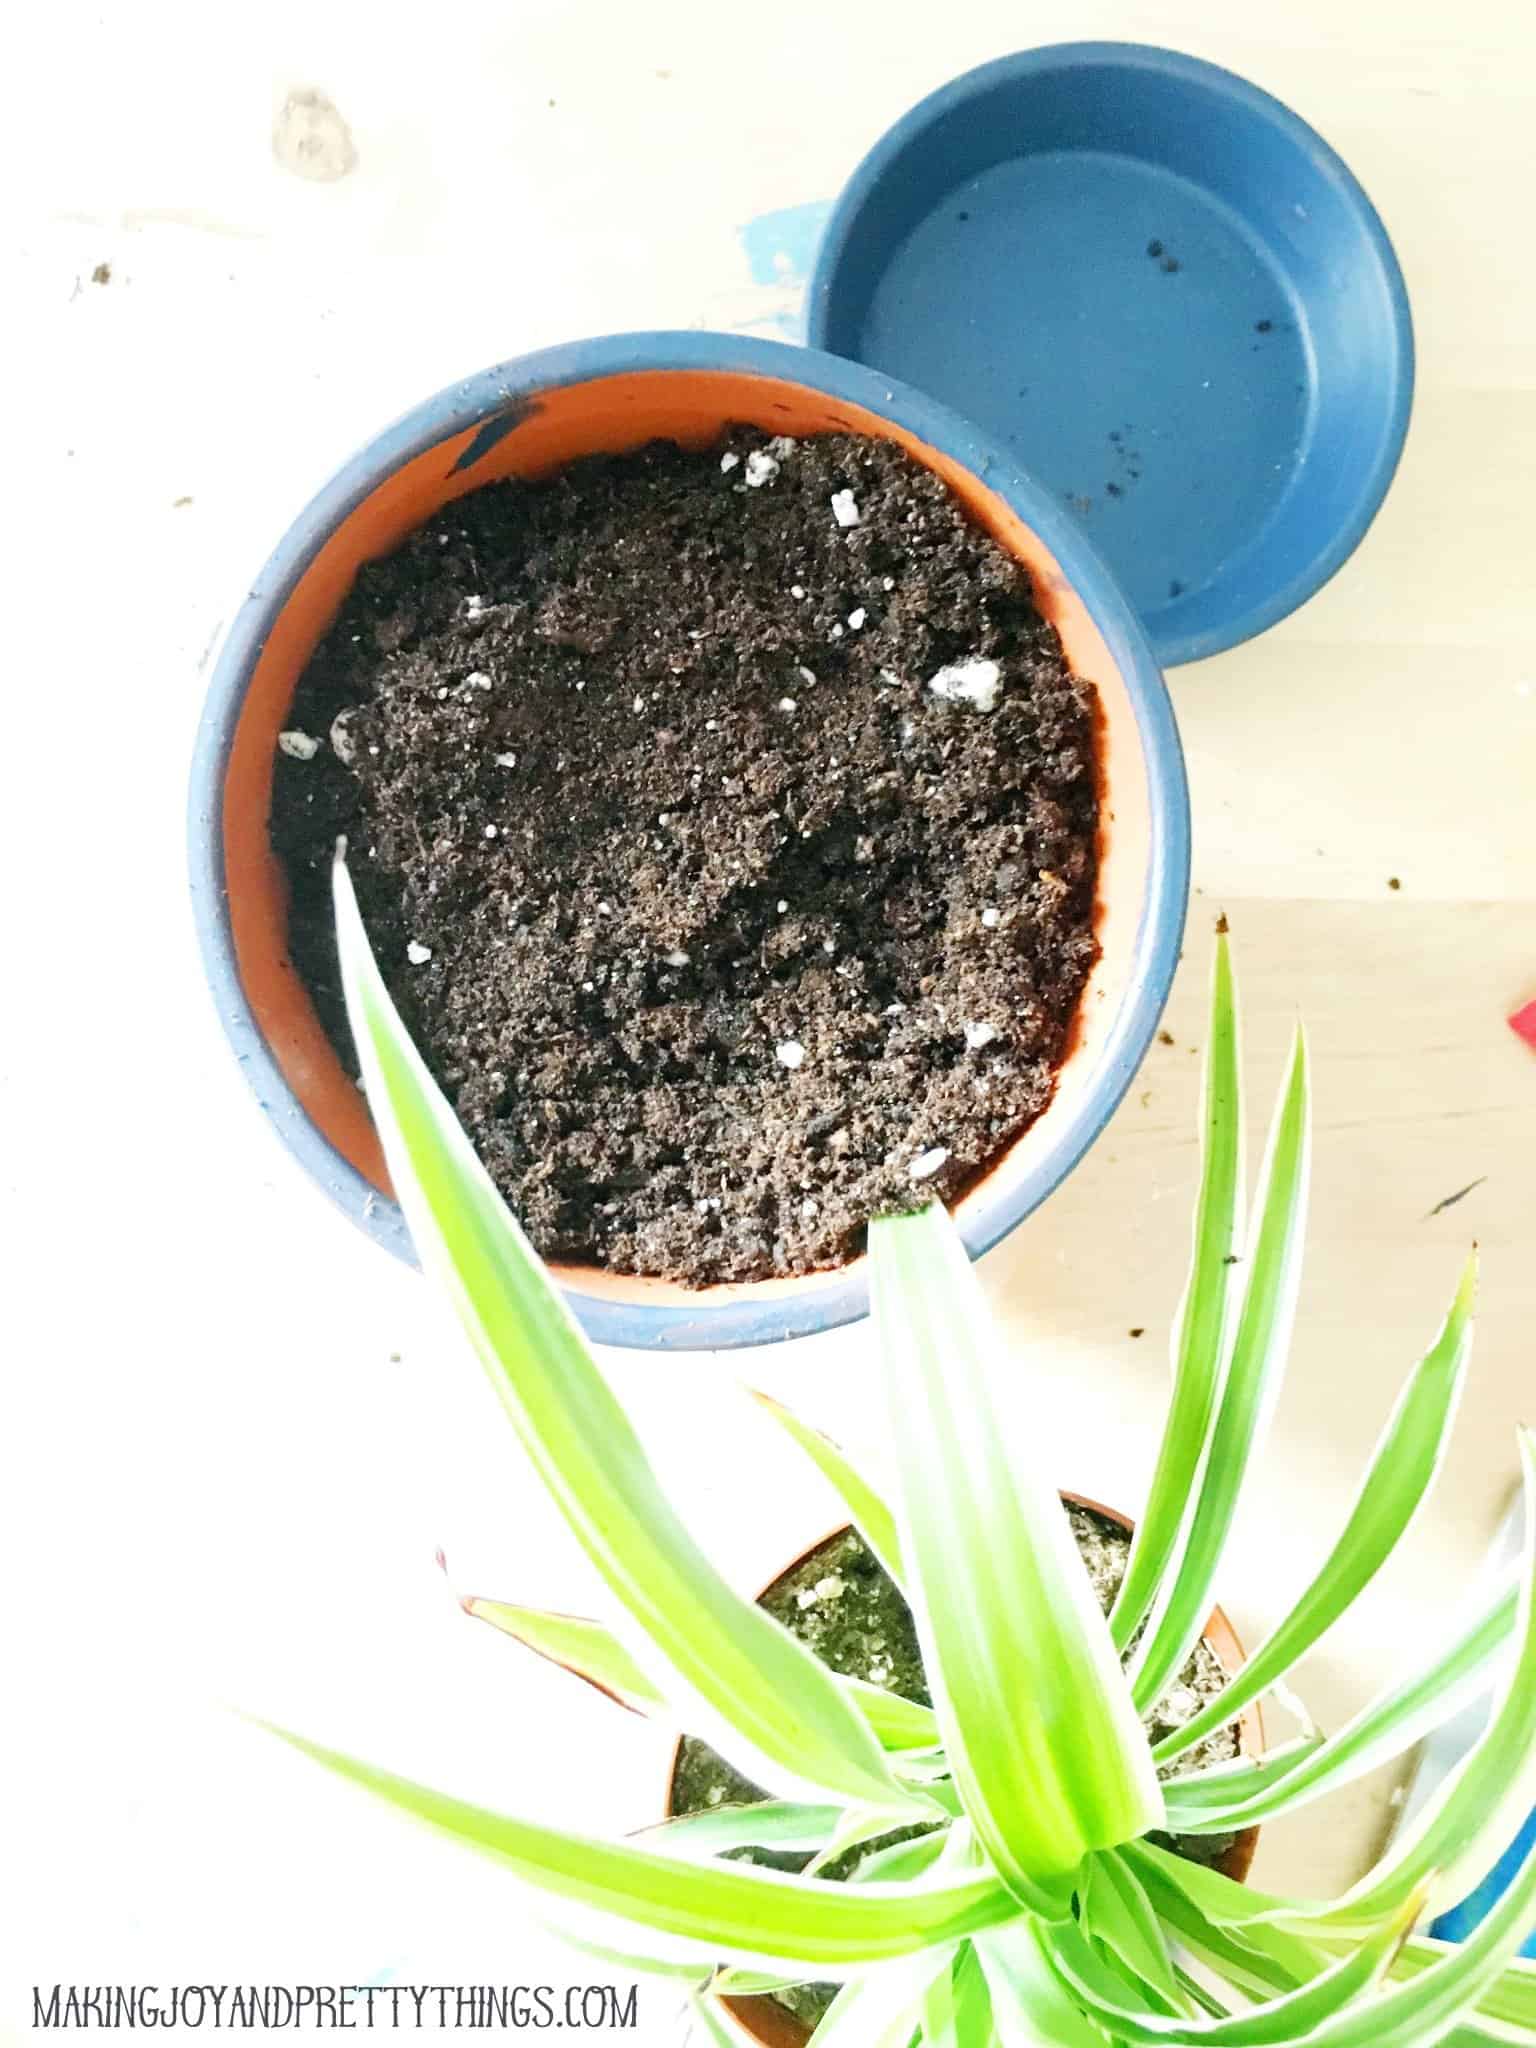 A blue-painted terra cotta pot is filled with potting soil, and a healthy green dracaena plant is ready to be transferred into the terra cotta pot.